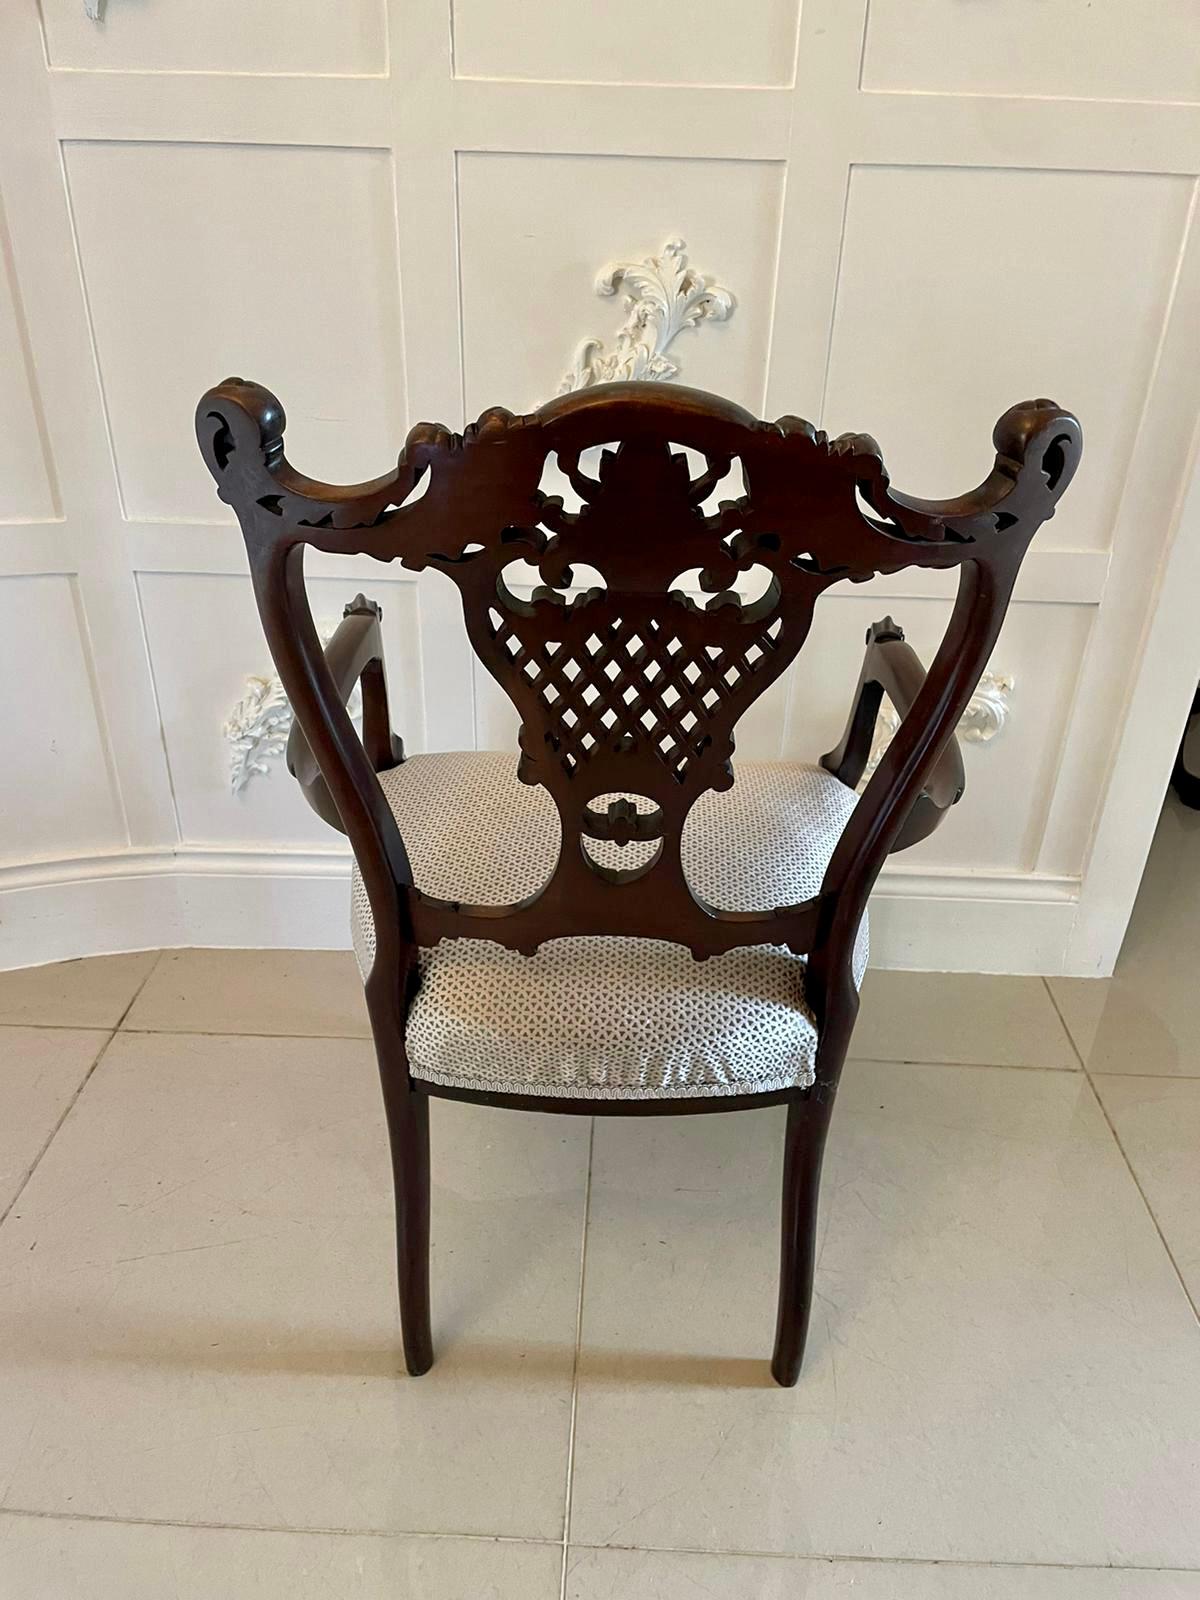 19th Century Fine Quality Antique Victorian Mahogany Carved Arm/Desk Chair For Sale